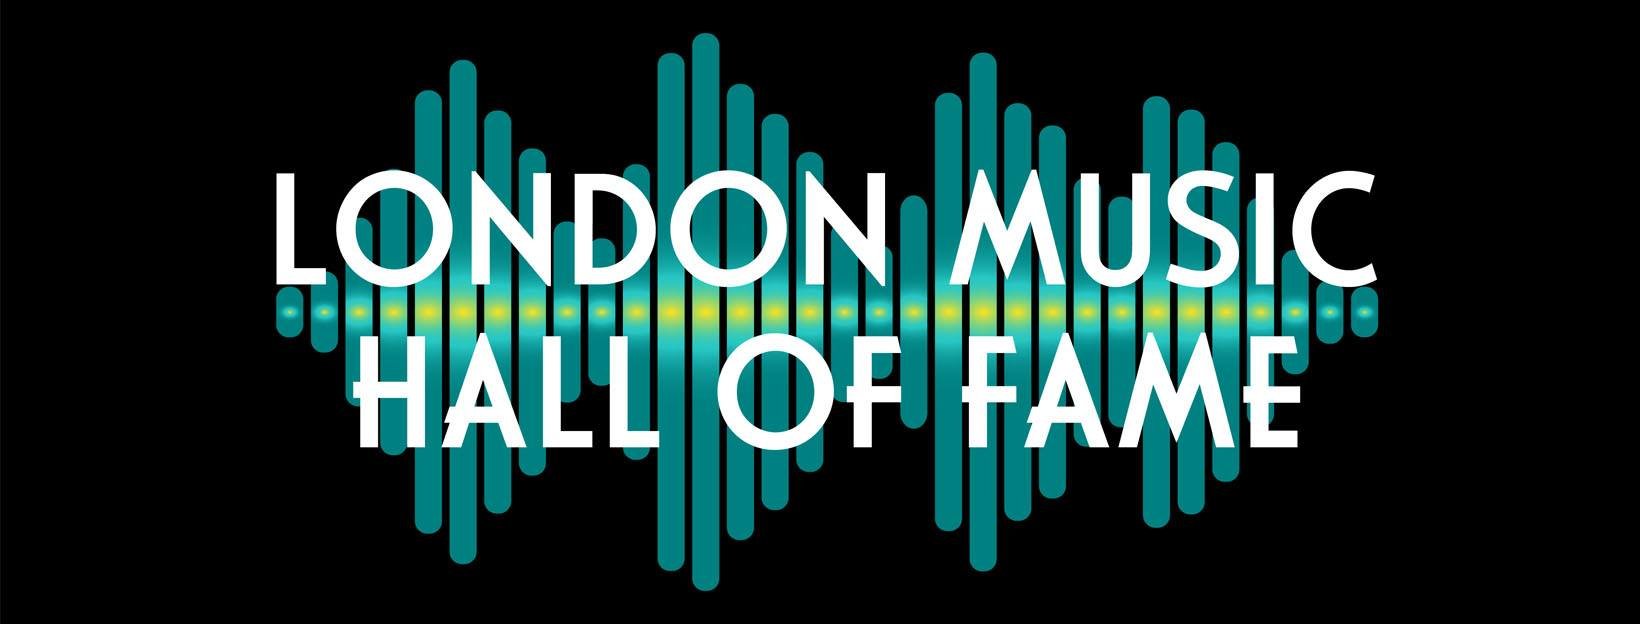 London Music Hall of Fame Logo with link to their website